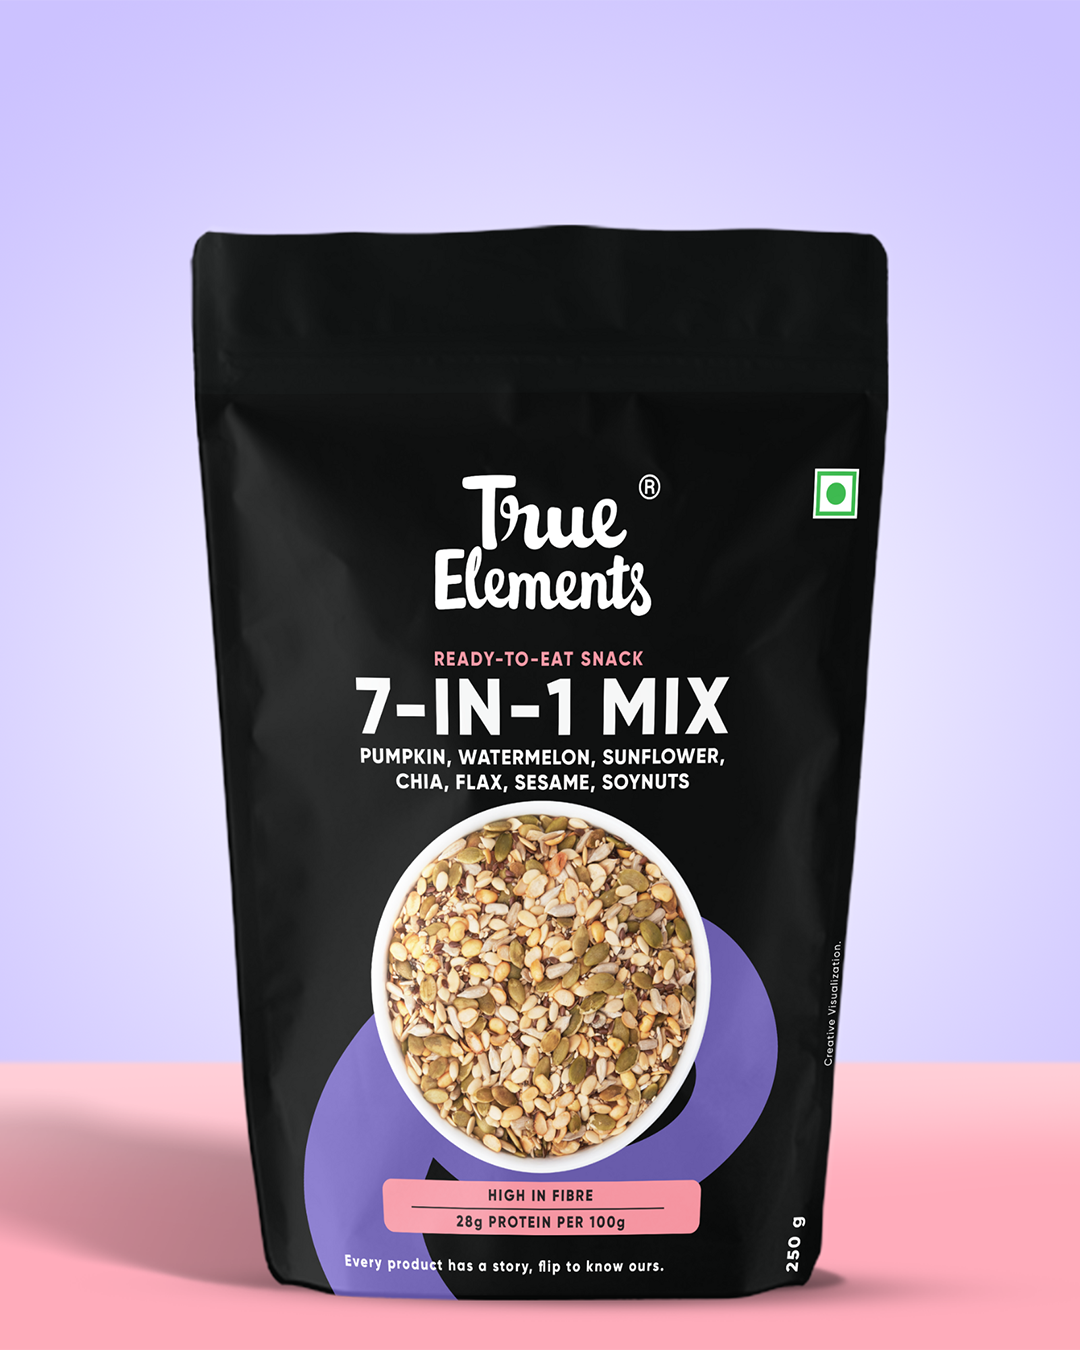 7-in-1 Super Seeds Mix 250gm & Raw Chia Seeds 250gm Combo (500gm)